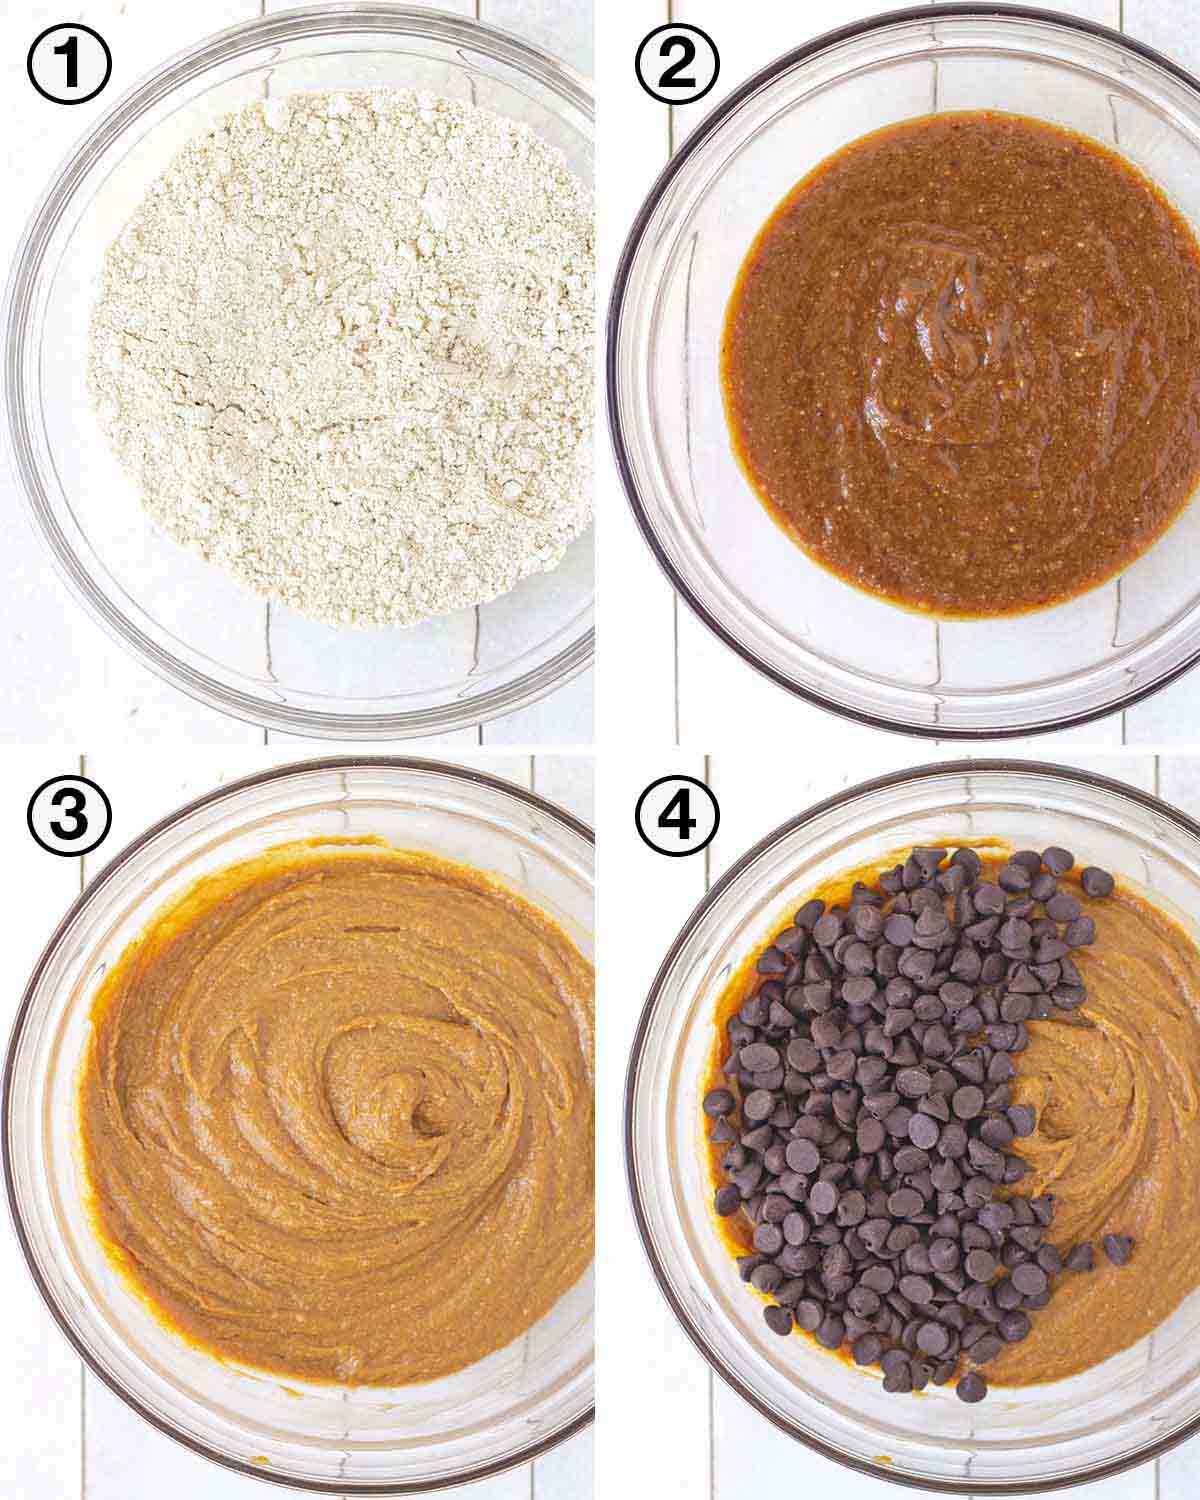 A collage of four images showing the first sequence of steps needed to make vegan gluten-free pumpkin muffins.